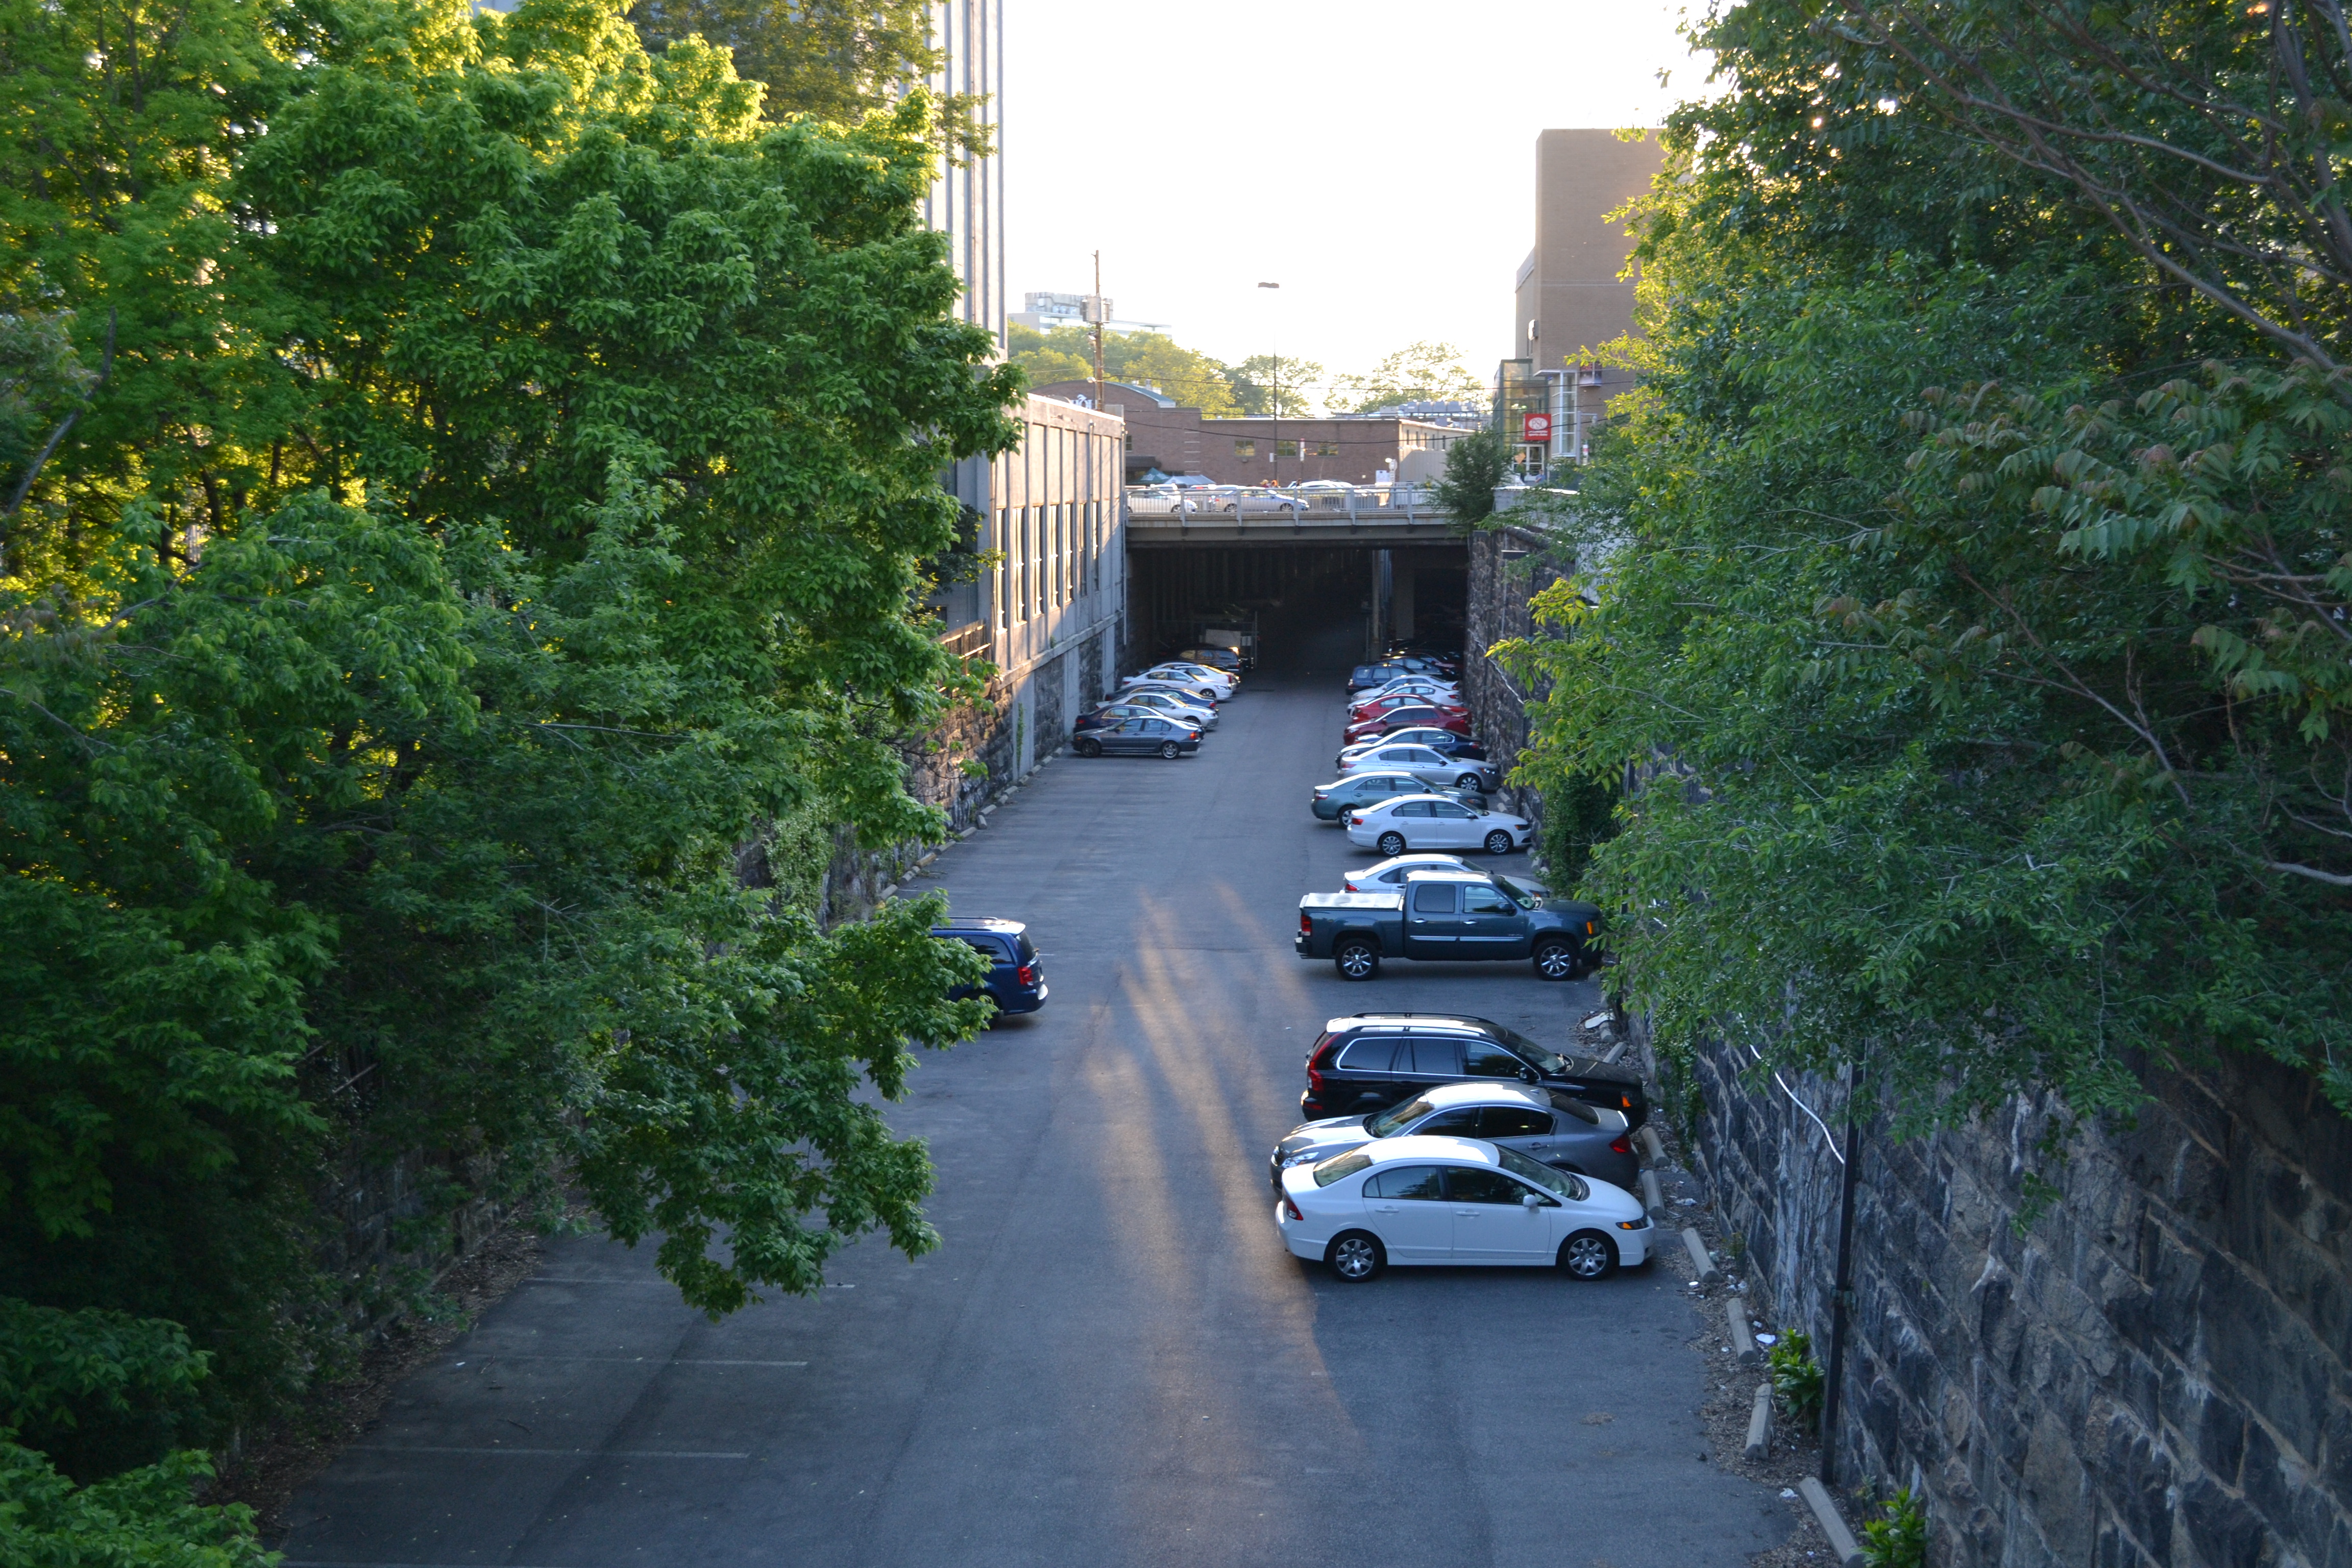 The former City Branch rail cut runs from Broad to 27th Street and portions are used for parking